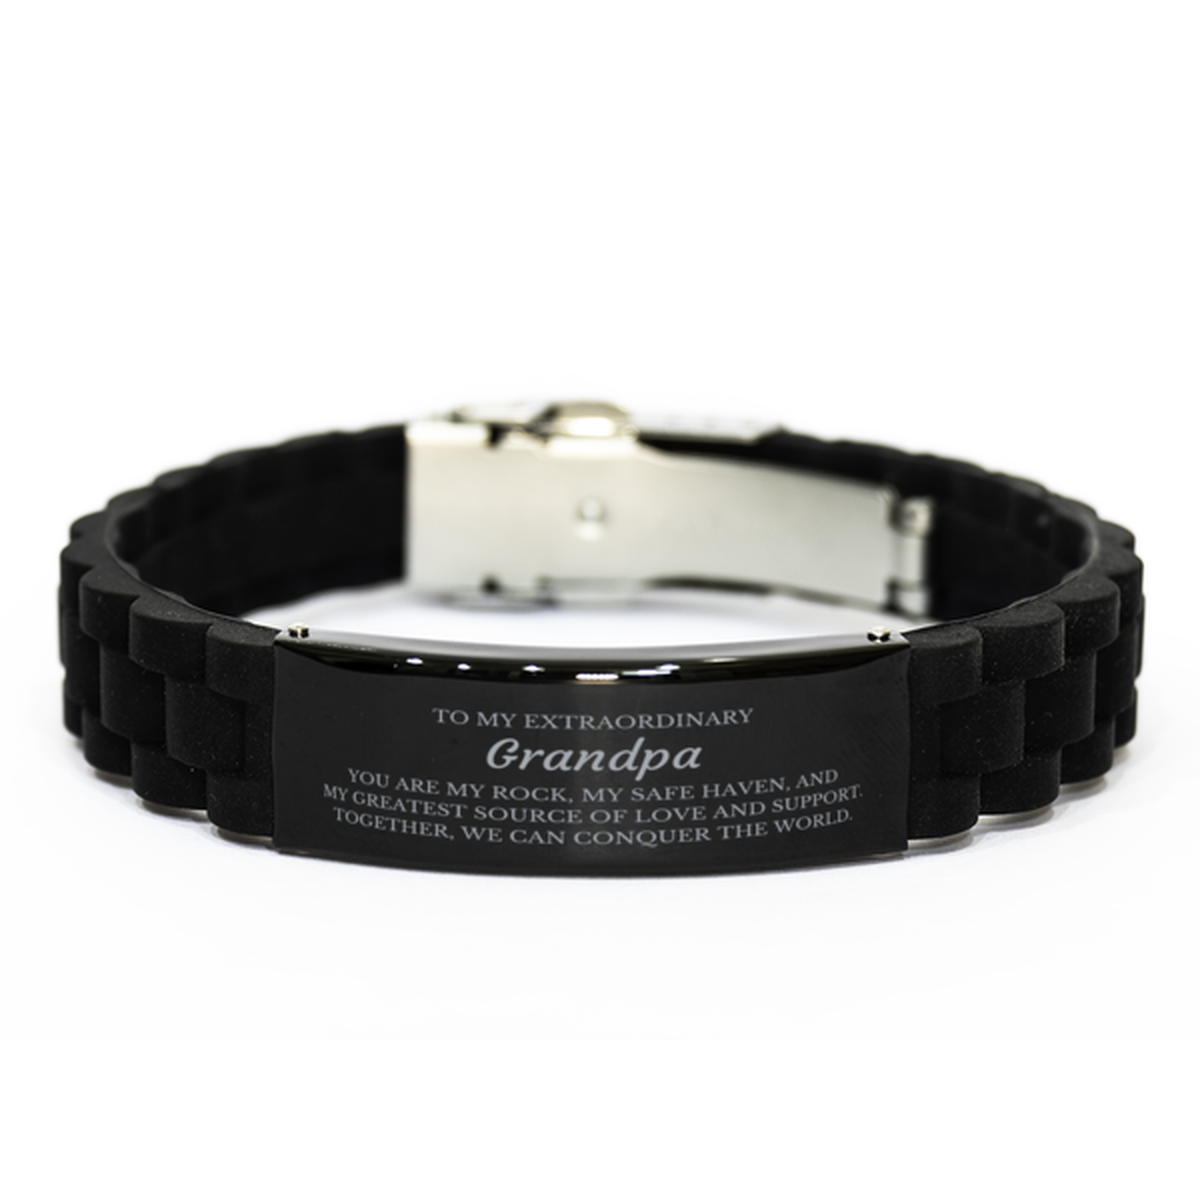 To My Extraordinary Grandpa Gifts, Together, we can conquer the world, Birthday Black Glidelock Clasp Bracelet For Grandpa, Christmas Gifts For Grandpa